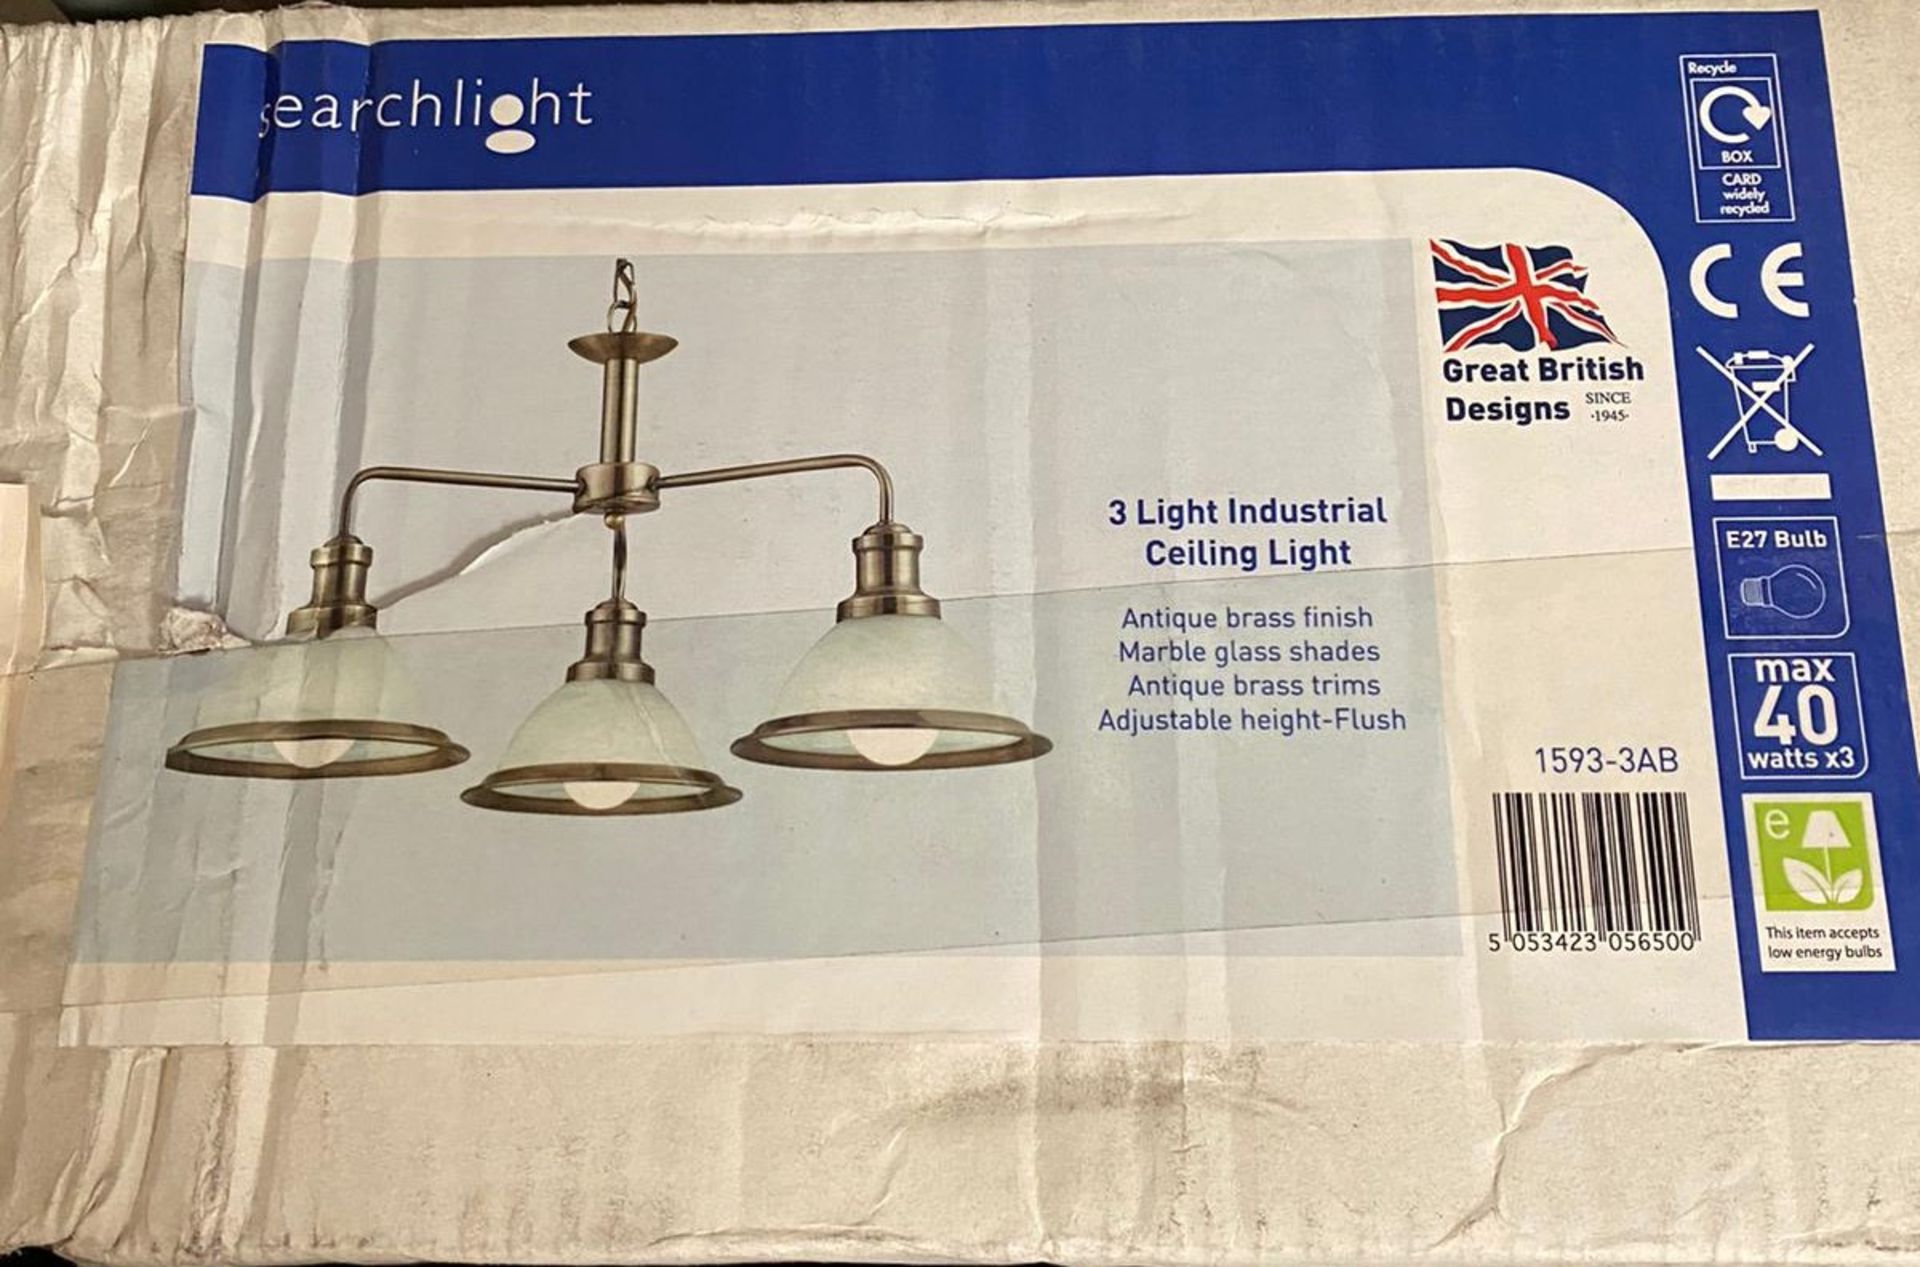 1 x Searchlight Industrial Ceiling Light in Antique Brass - Ref: 1593-3AB -New and Boxed - RRP: £100